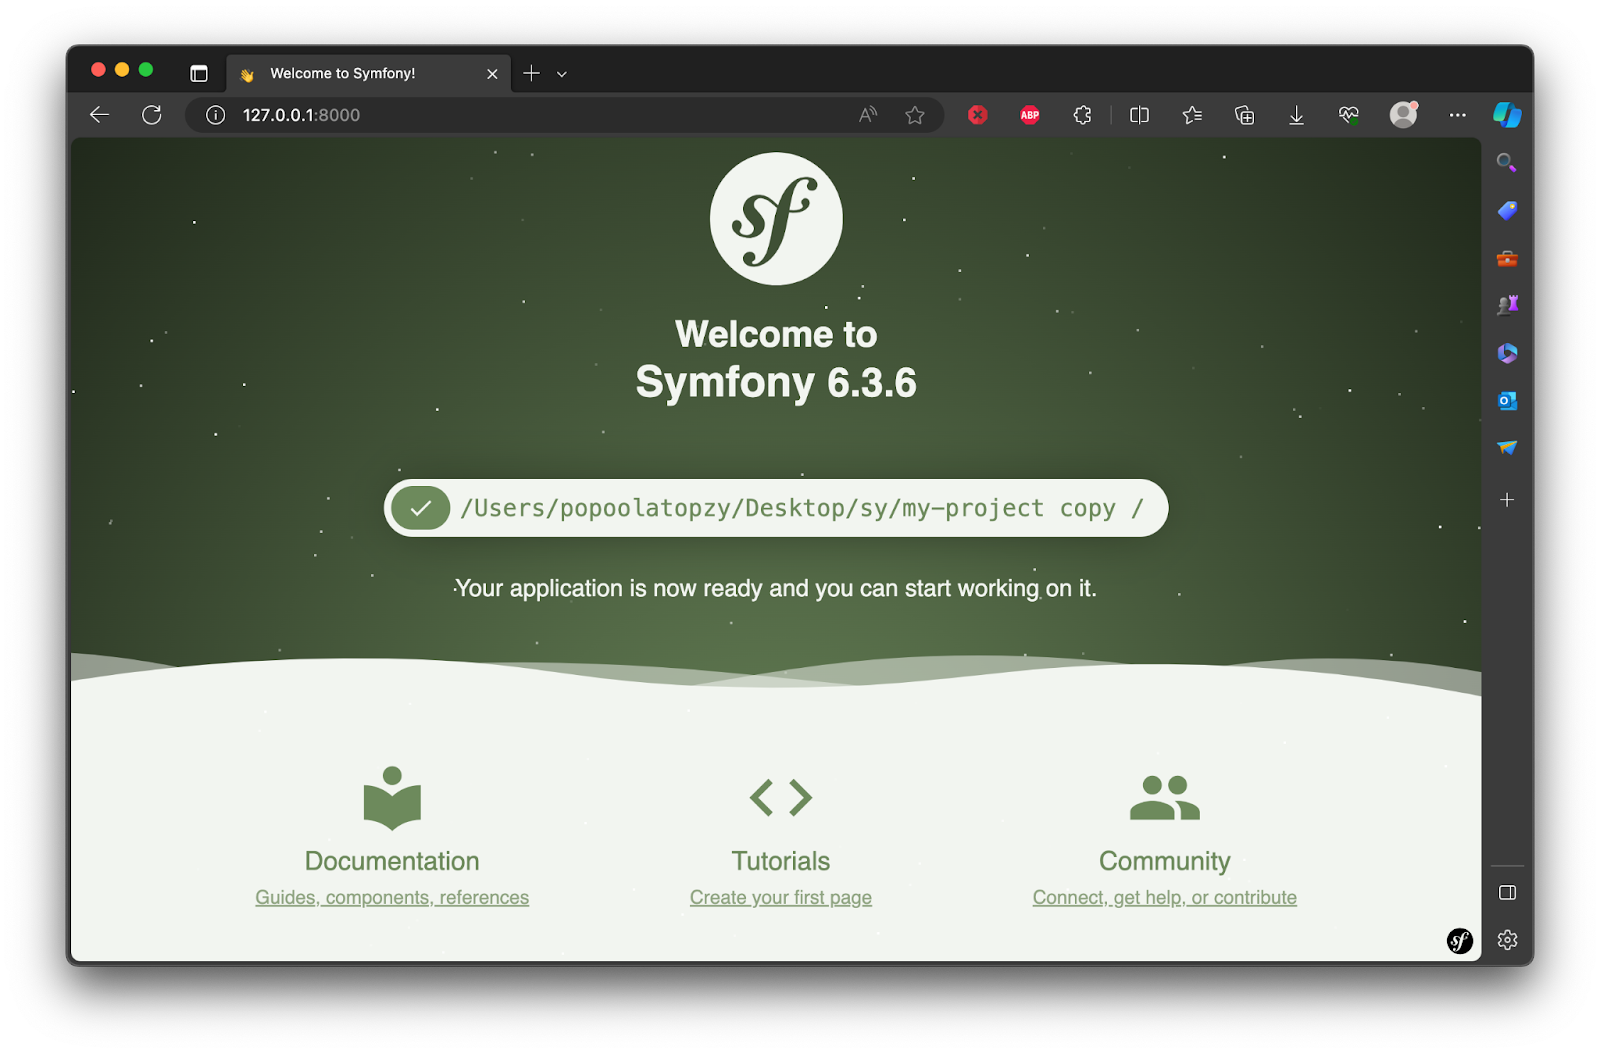 The default Symfony application welcome page